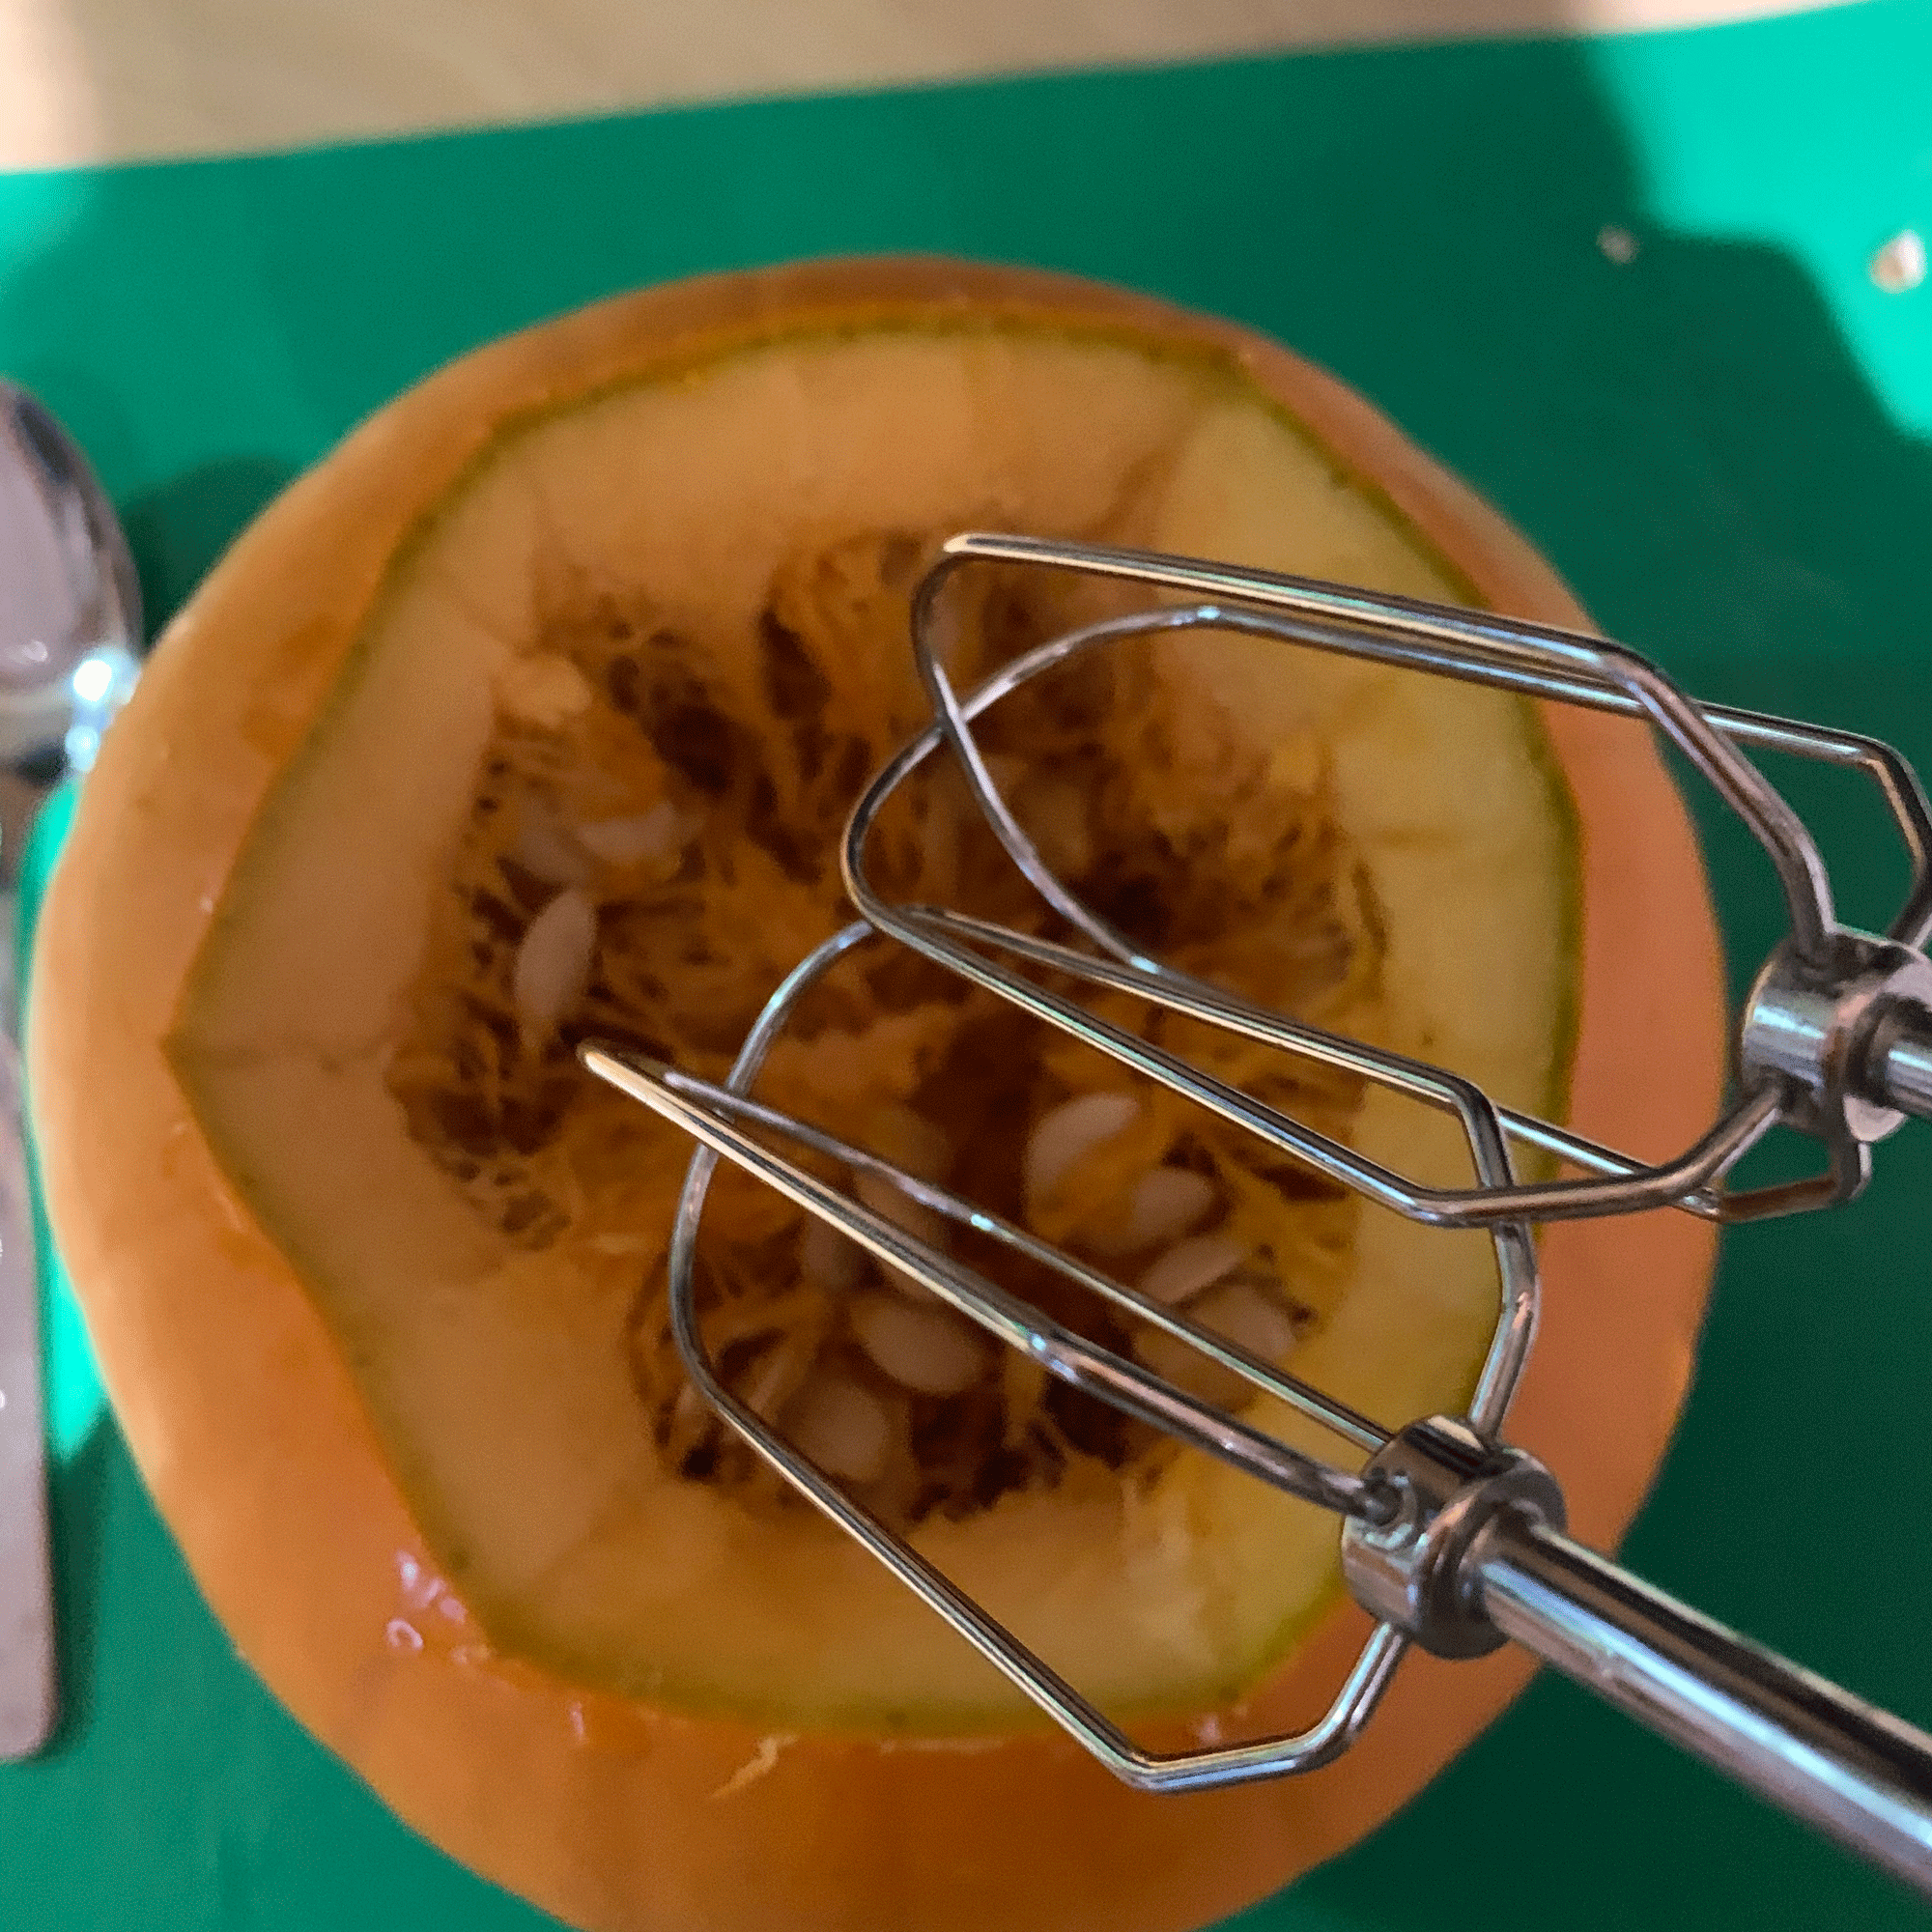 Pumpkin with electric whisk